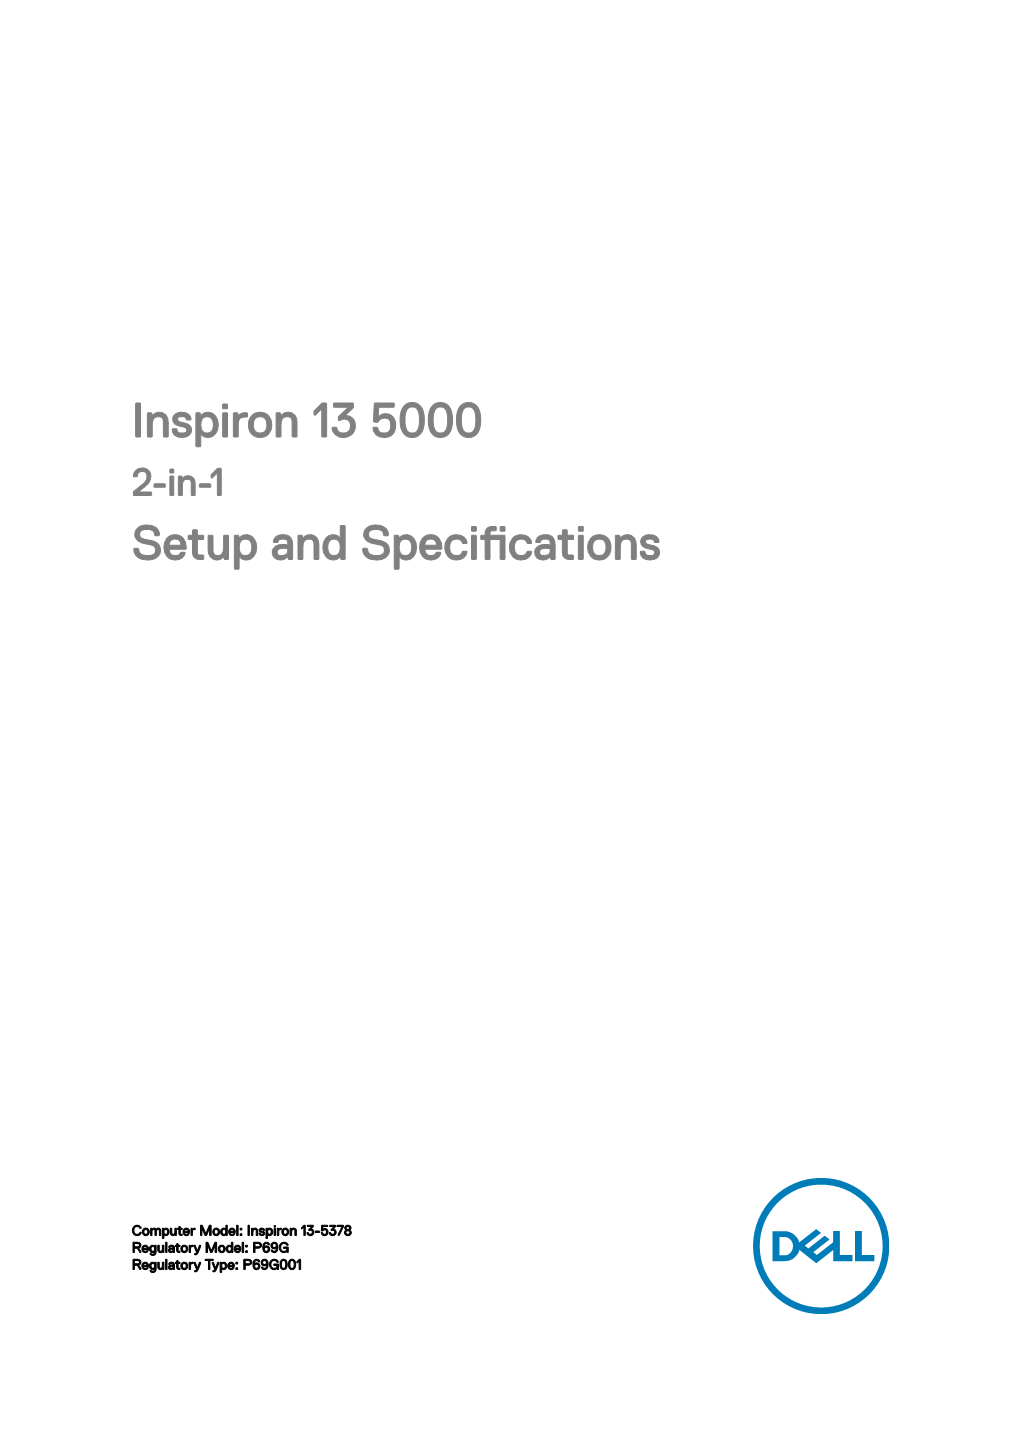 Inspiron 13 5000 2-In-1 Setup and Specifications